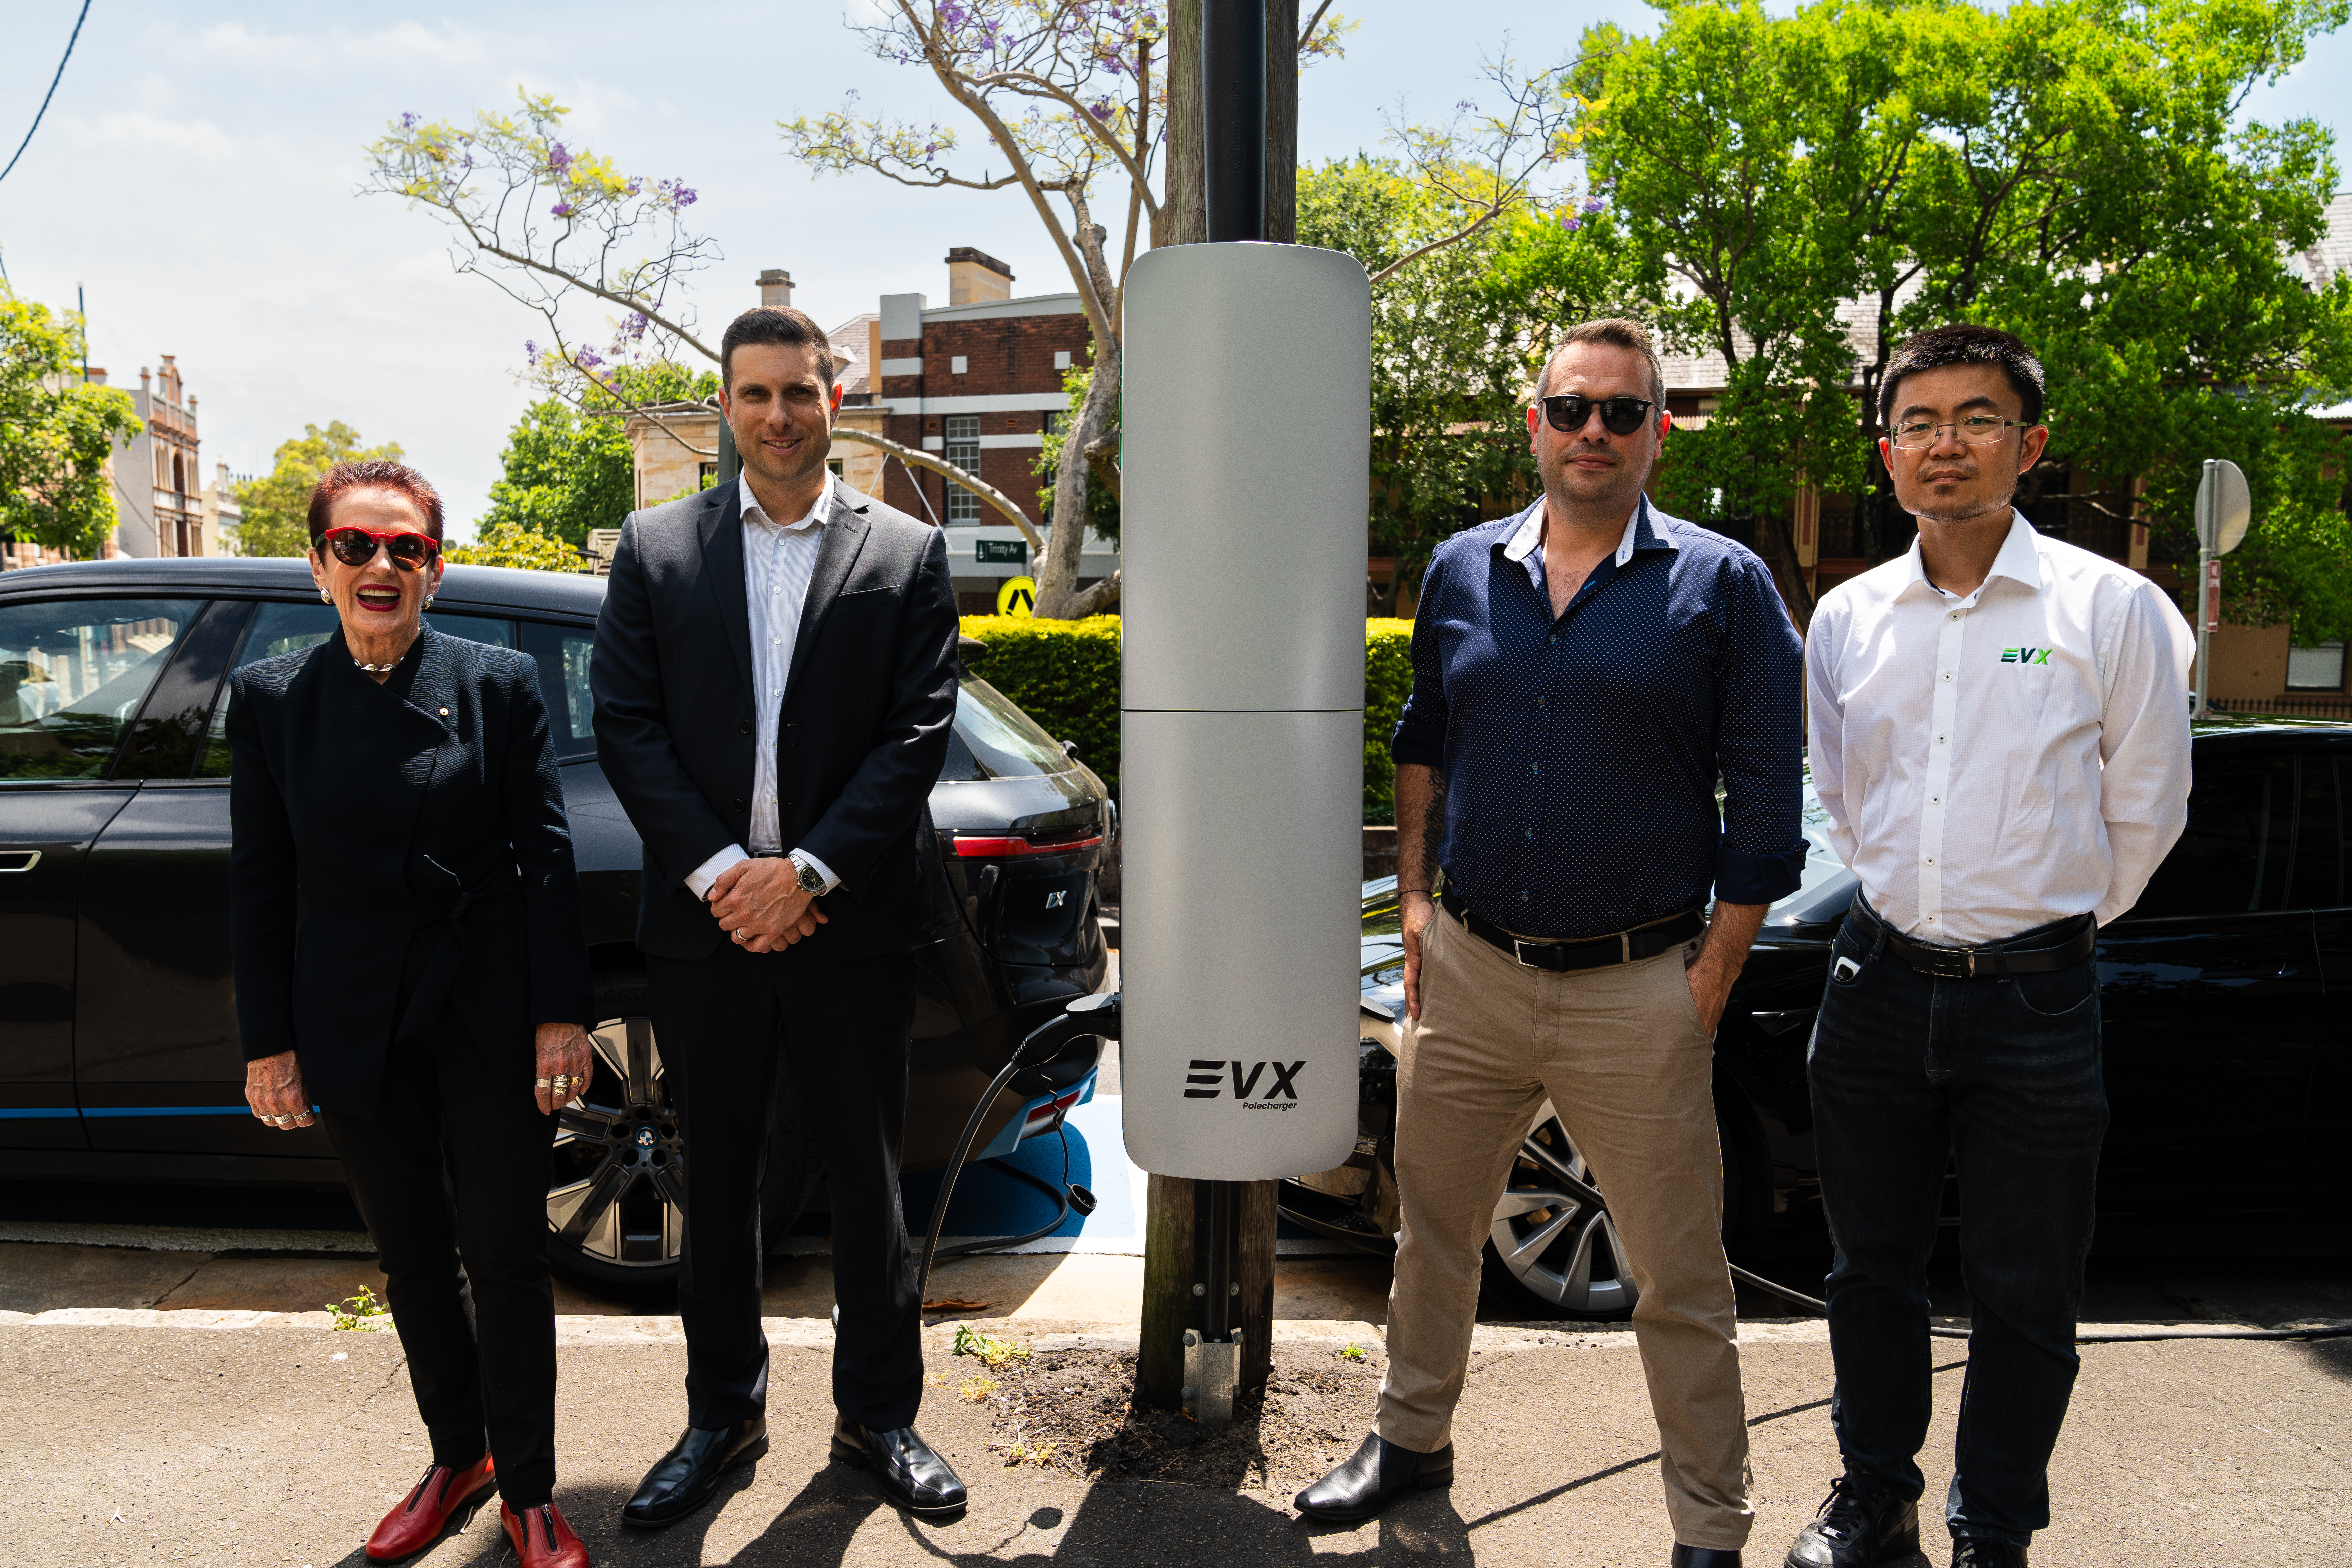 Lord Mayor of Sydney Clover Moore AO with Ausgrid&#39;s head of EV charging Nick Black, EVX CEO Andrew Forster and EVX chief technology officer Sihan Li. Image: City of Sydney/Nick Langley